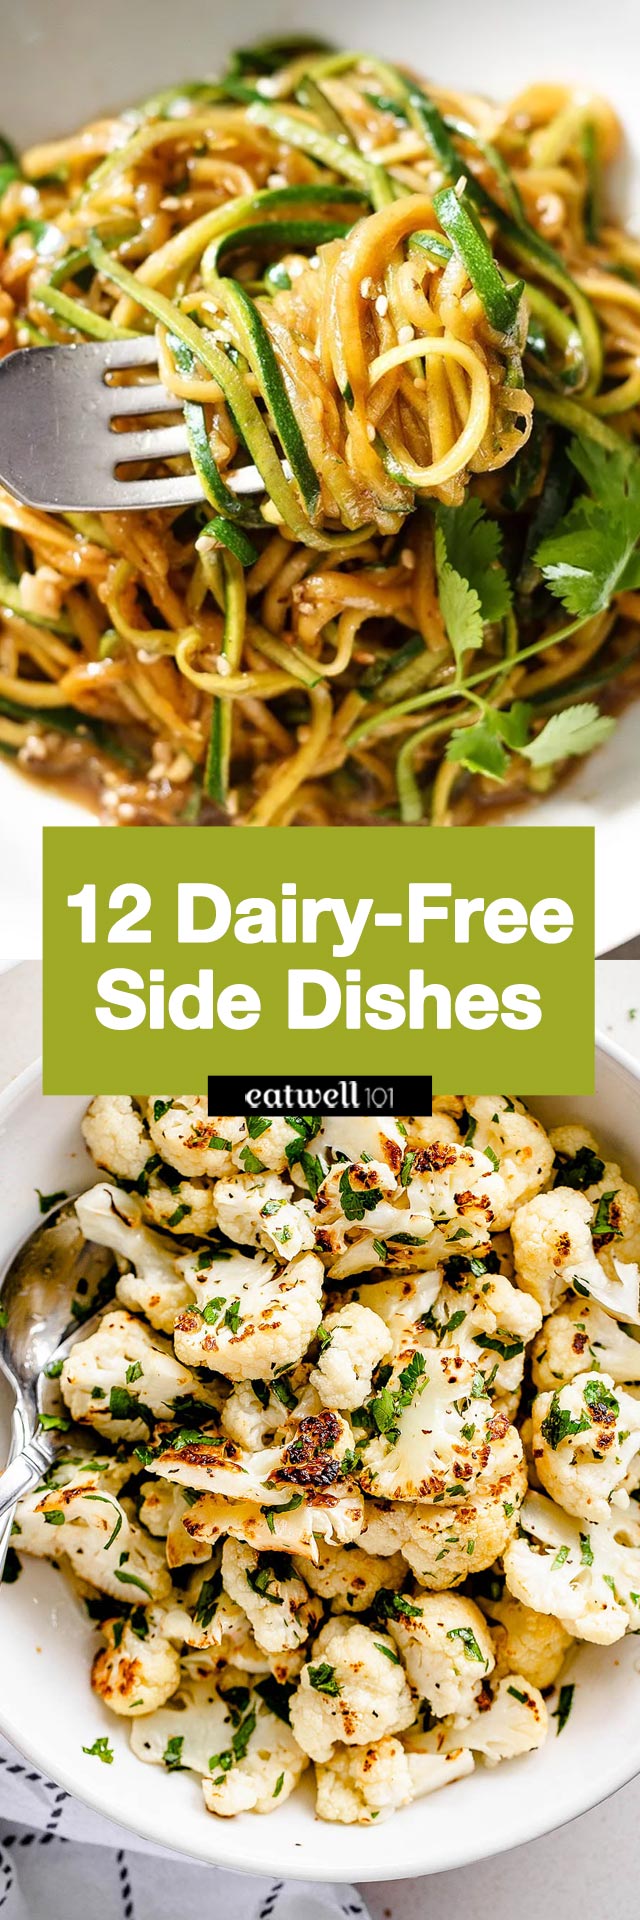 Dairy-Free SIde Dishes - #dairyfree #sides #recipes #eatwell101 - These 12 easy dairy-free side dishes may just outshine the main course. 